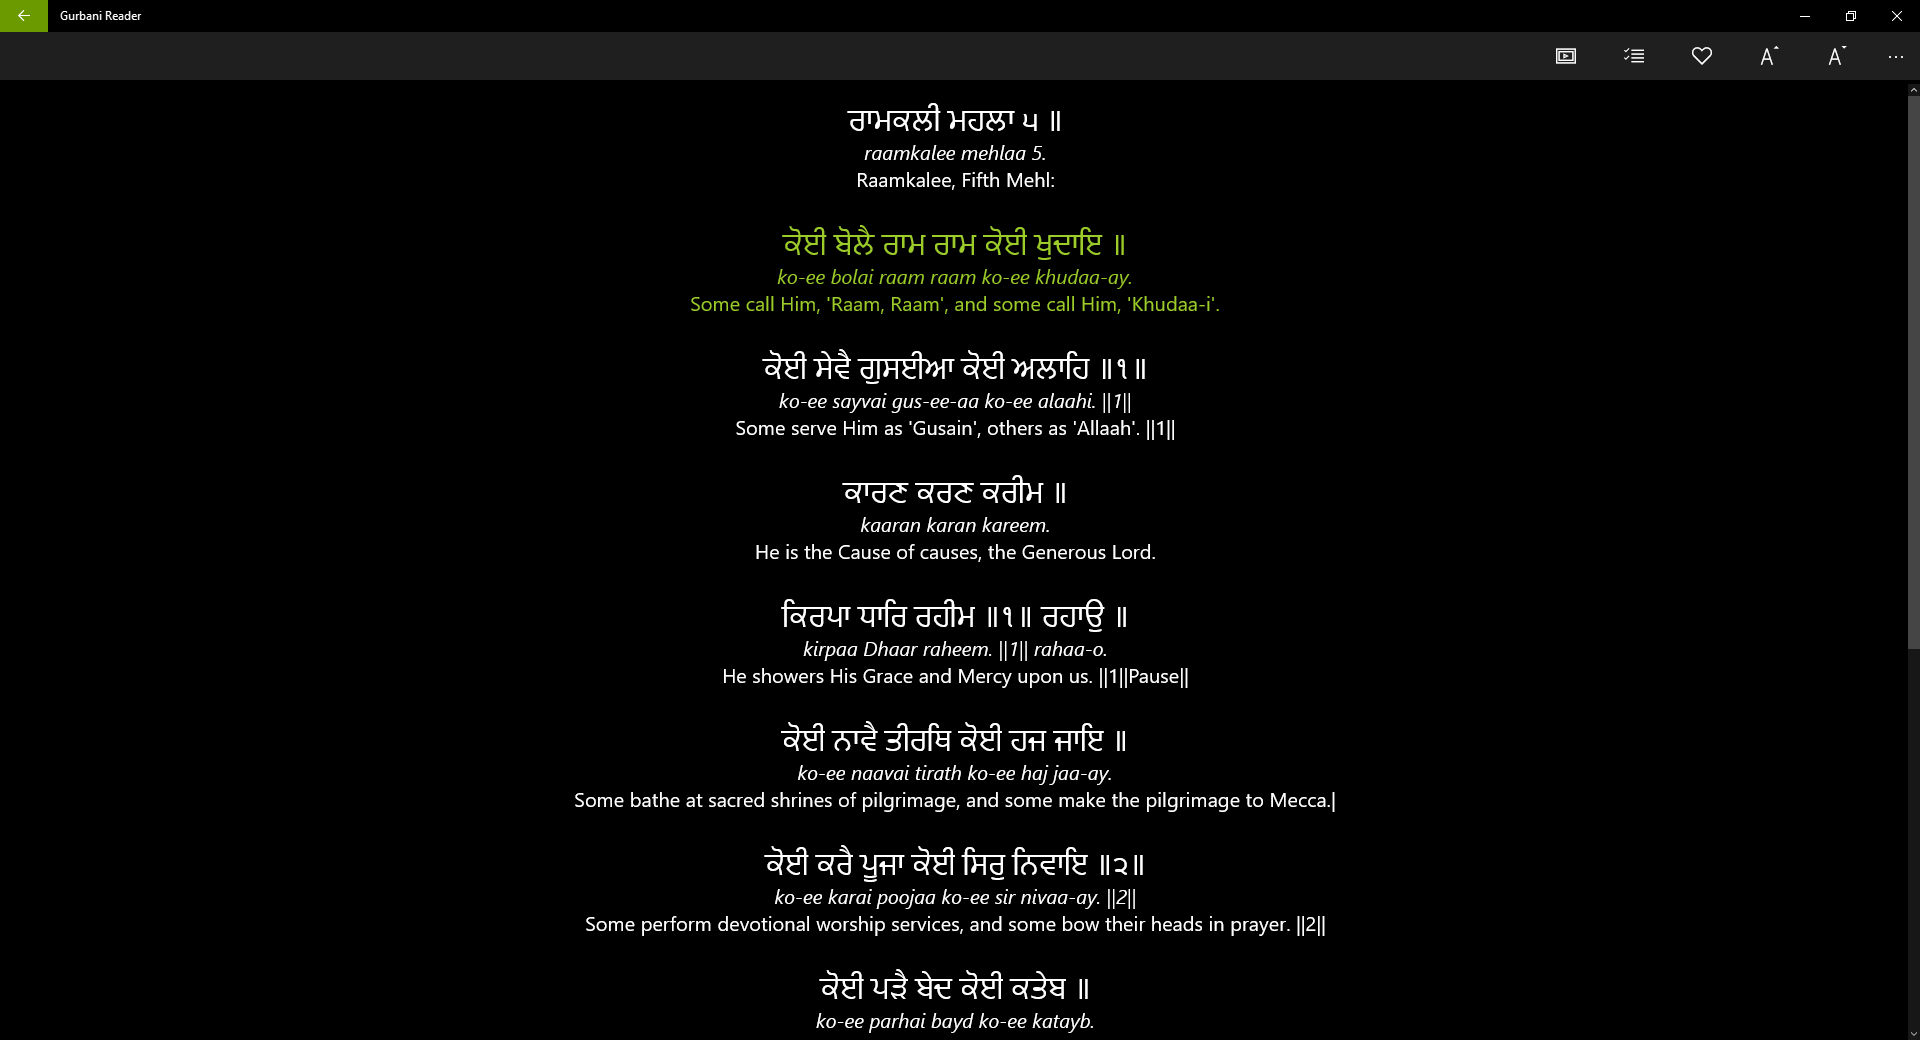 Read Gurbani, along with Transliteration and Translation which can be turned on/off separately